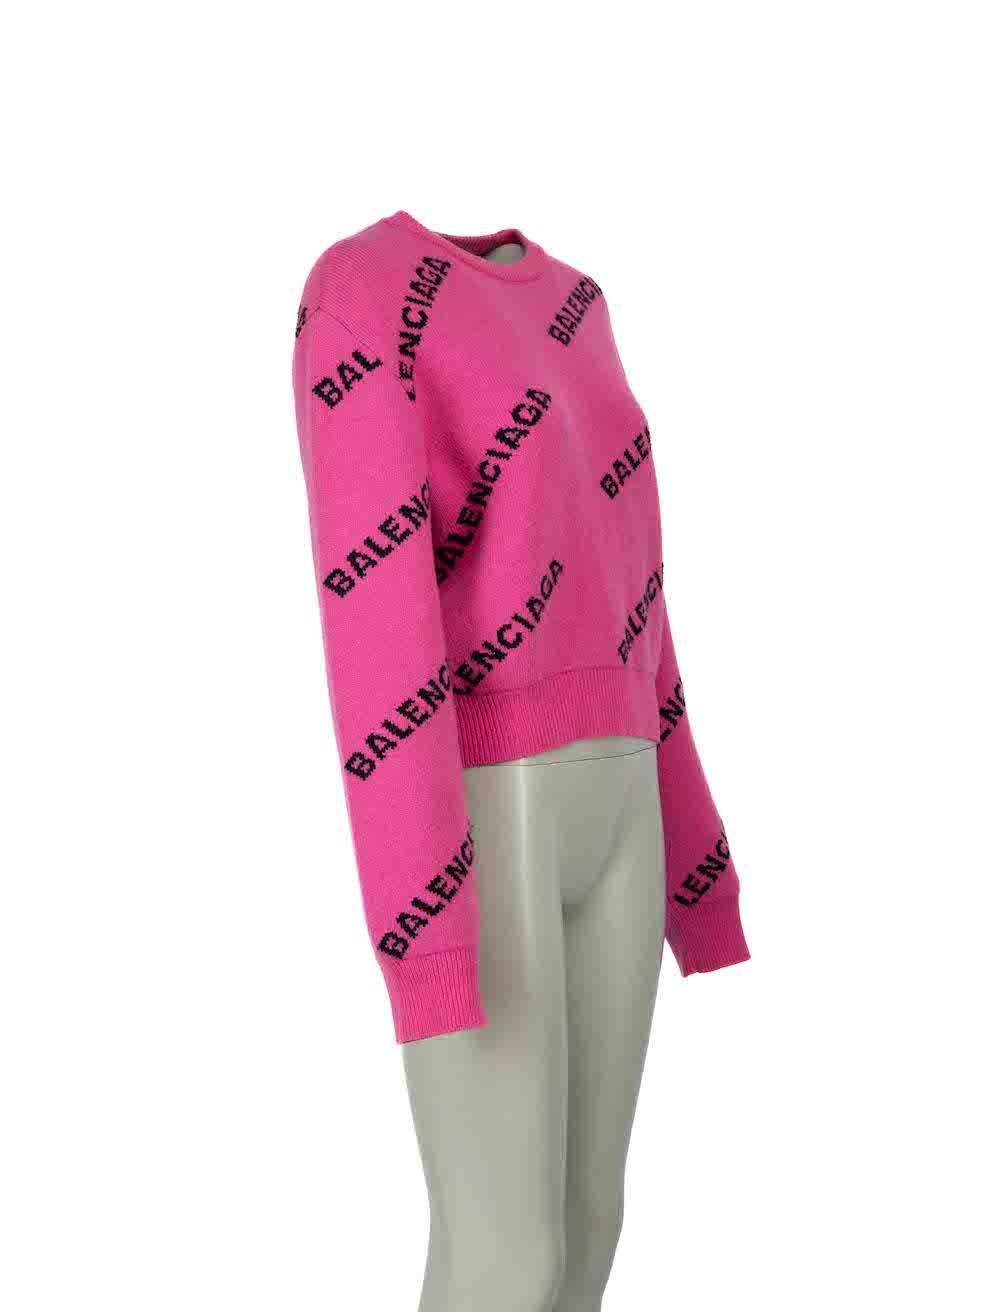 CONDITION is Very good. Minimal wear to jumper is evident. Minimal pilling to overall material and small stain to centre front is evident on this used Balenciaga designer resale item.

Details
Pink
Wool
Long sleeves jumper
Round neckline
Logo